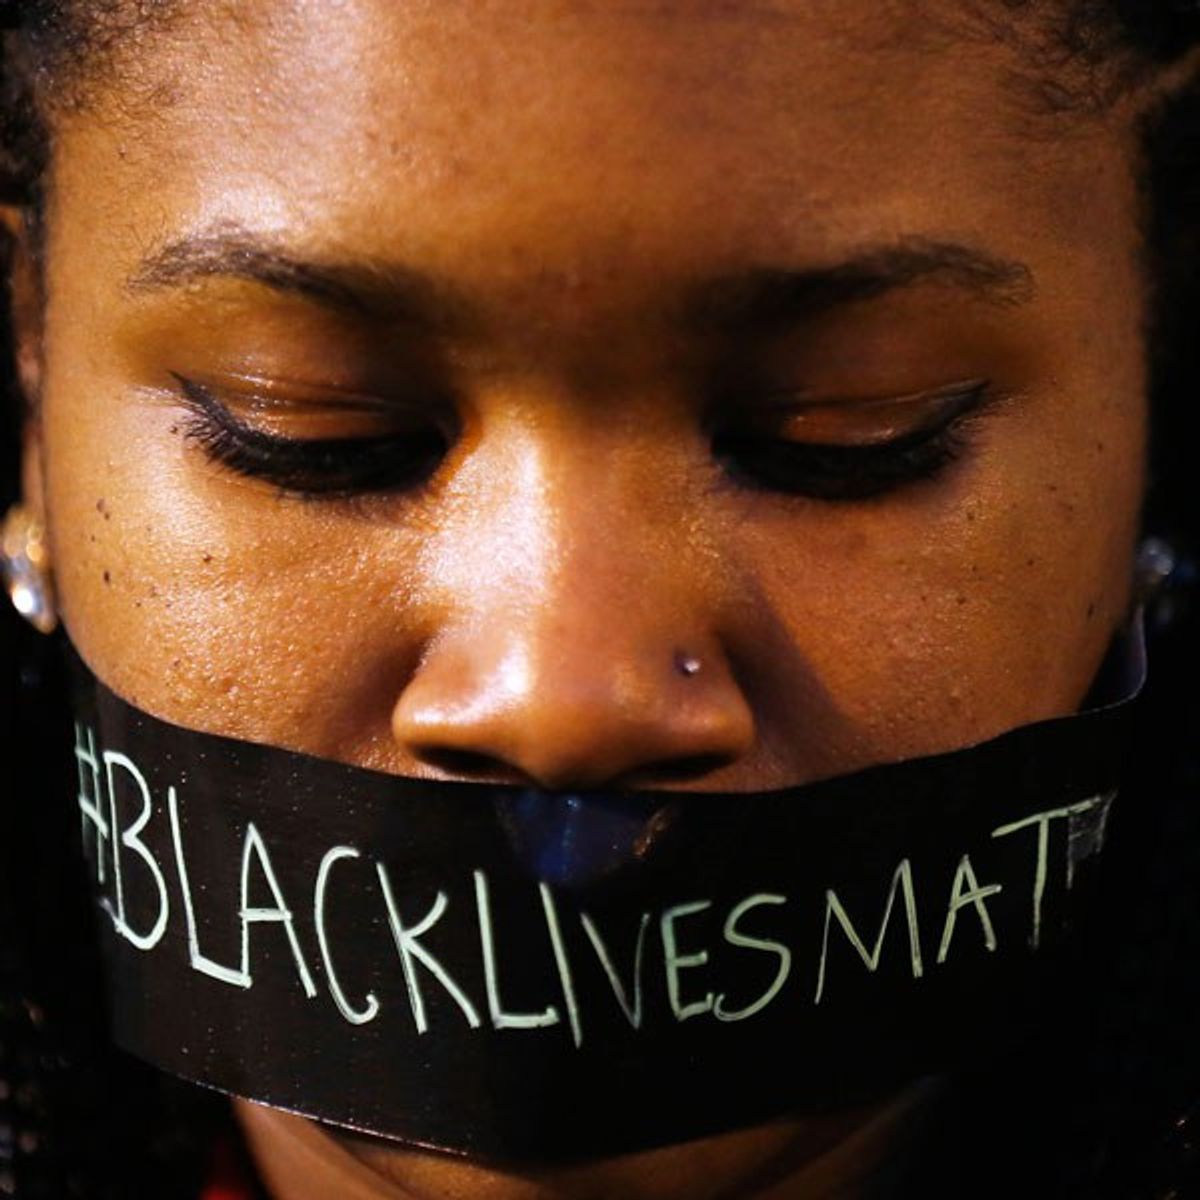 An Open Letter To The 'All Lives Matter' Group